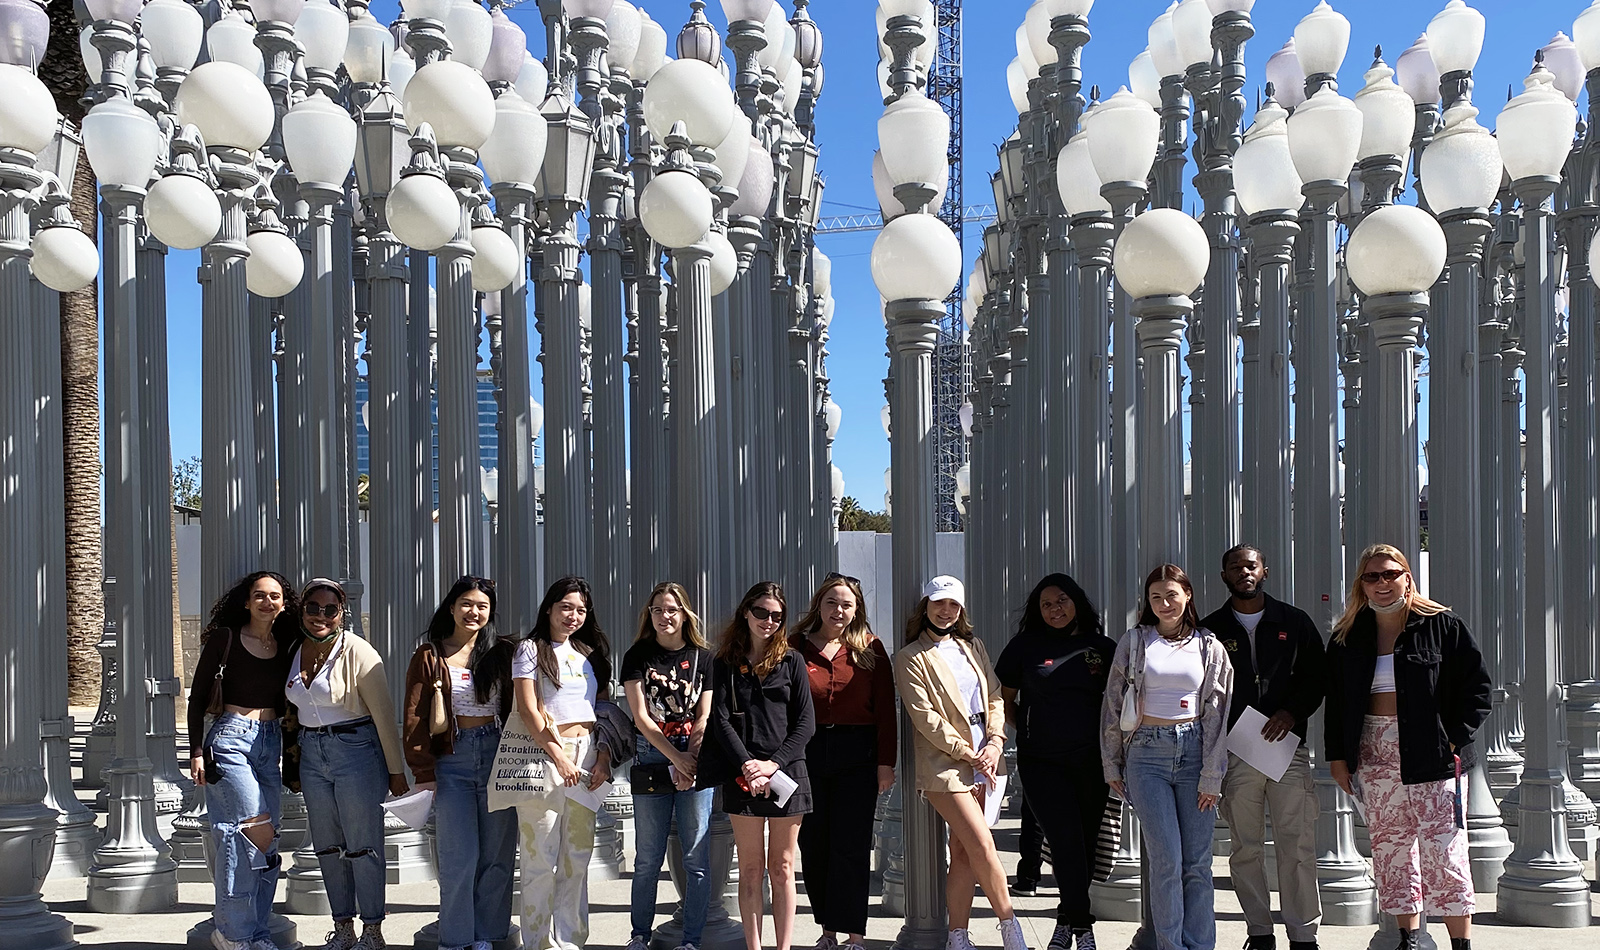 A group of students standing in front of many light posts